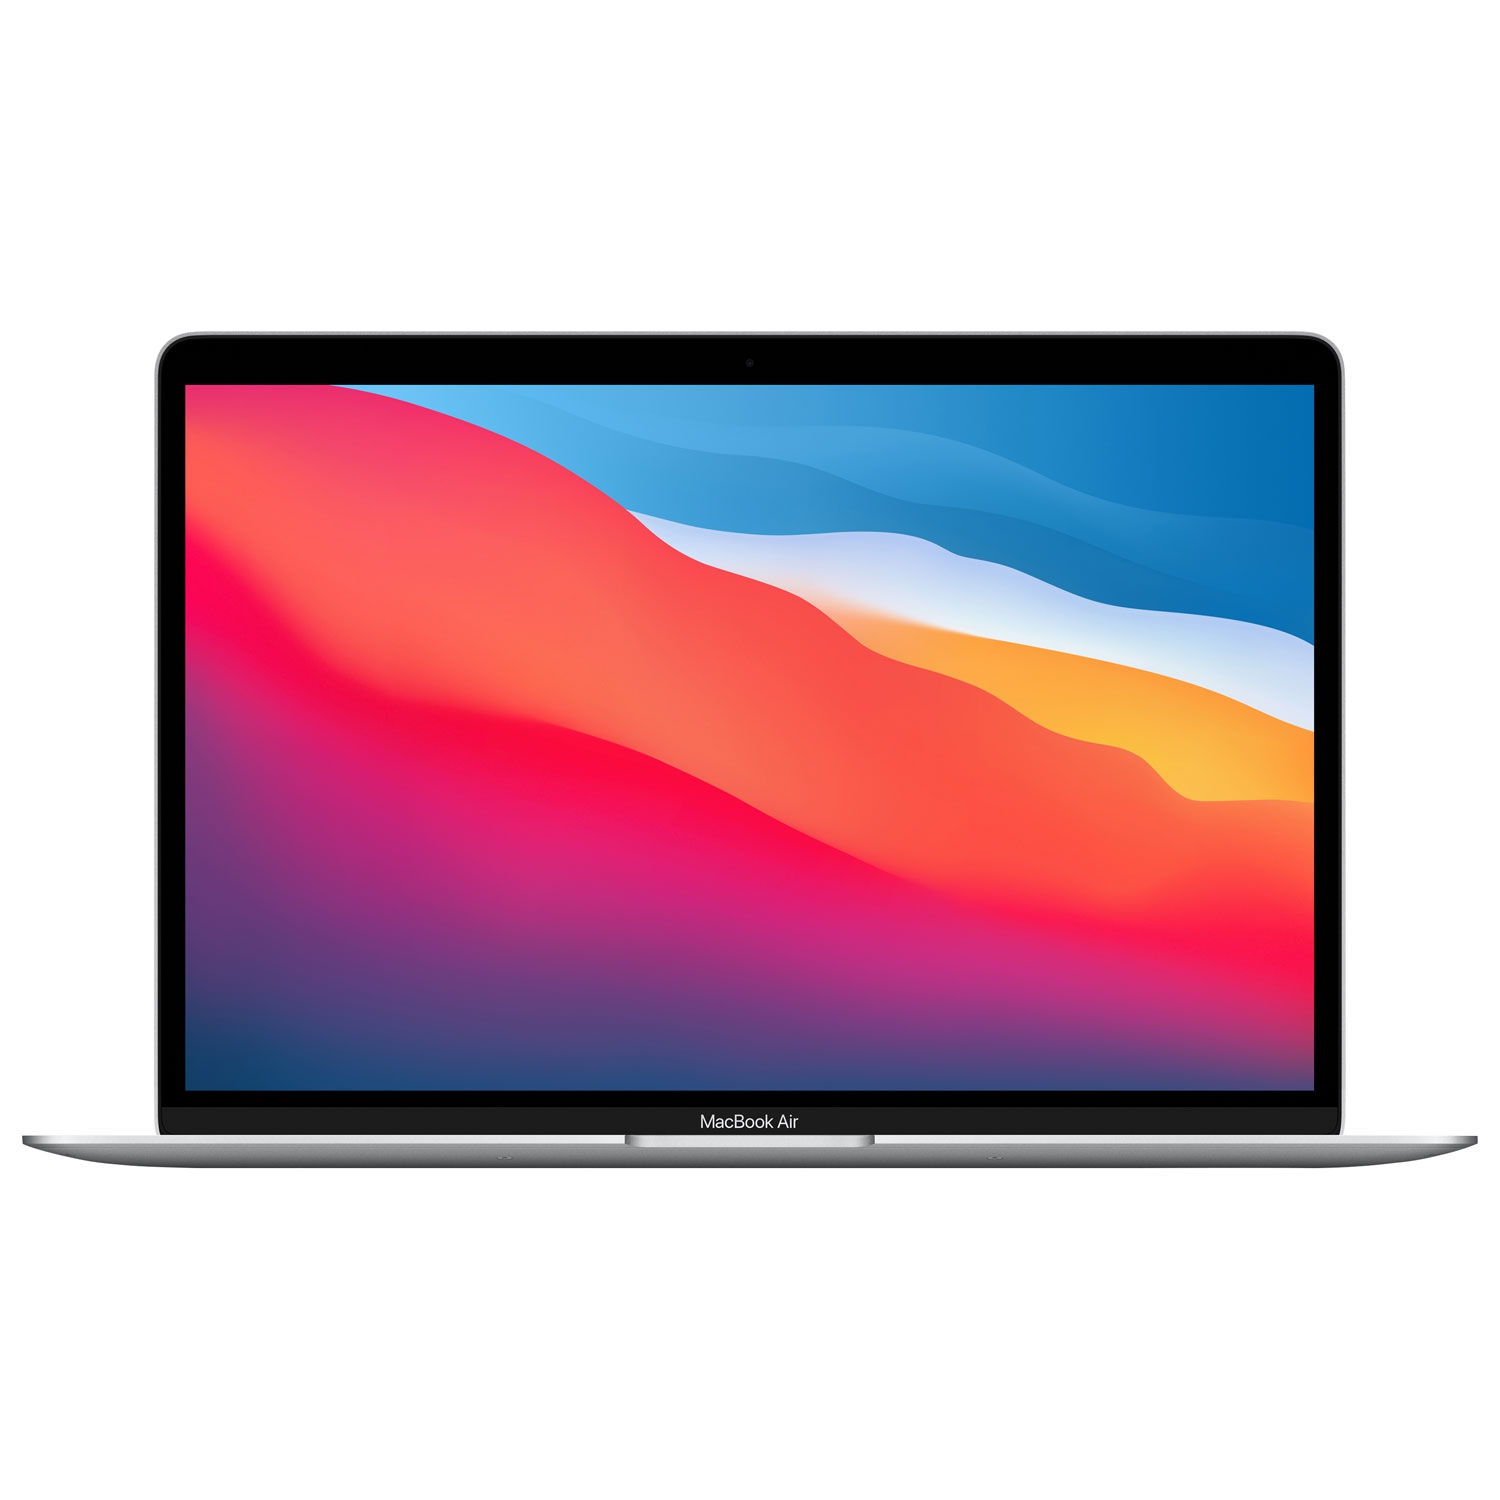 Apple MacBook Air 13.3" w/ Touch ID (Fall 2020) - Silver (Apple M1 Chip / 256GB SSD / 8GB RAM) Apple Care+ Expires MAR 2024 - Open Box ( 10 / 10 Condition )